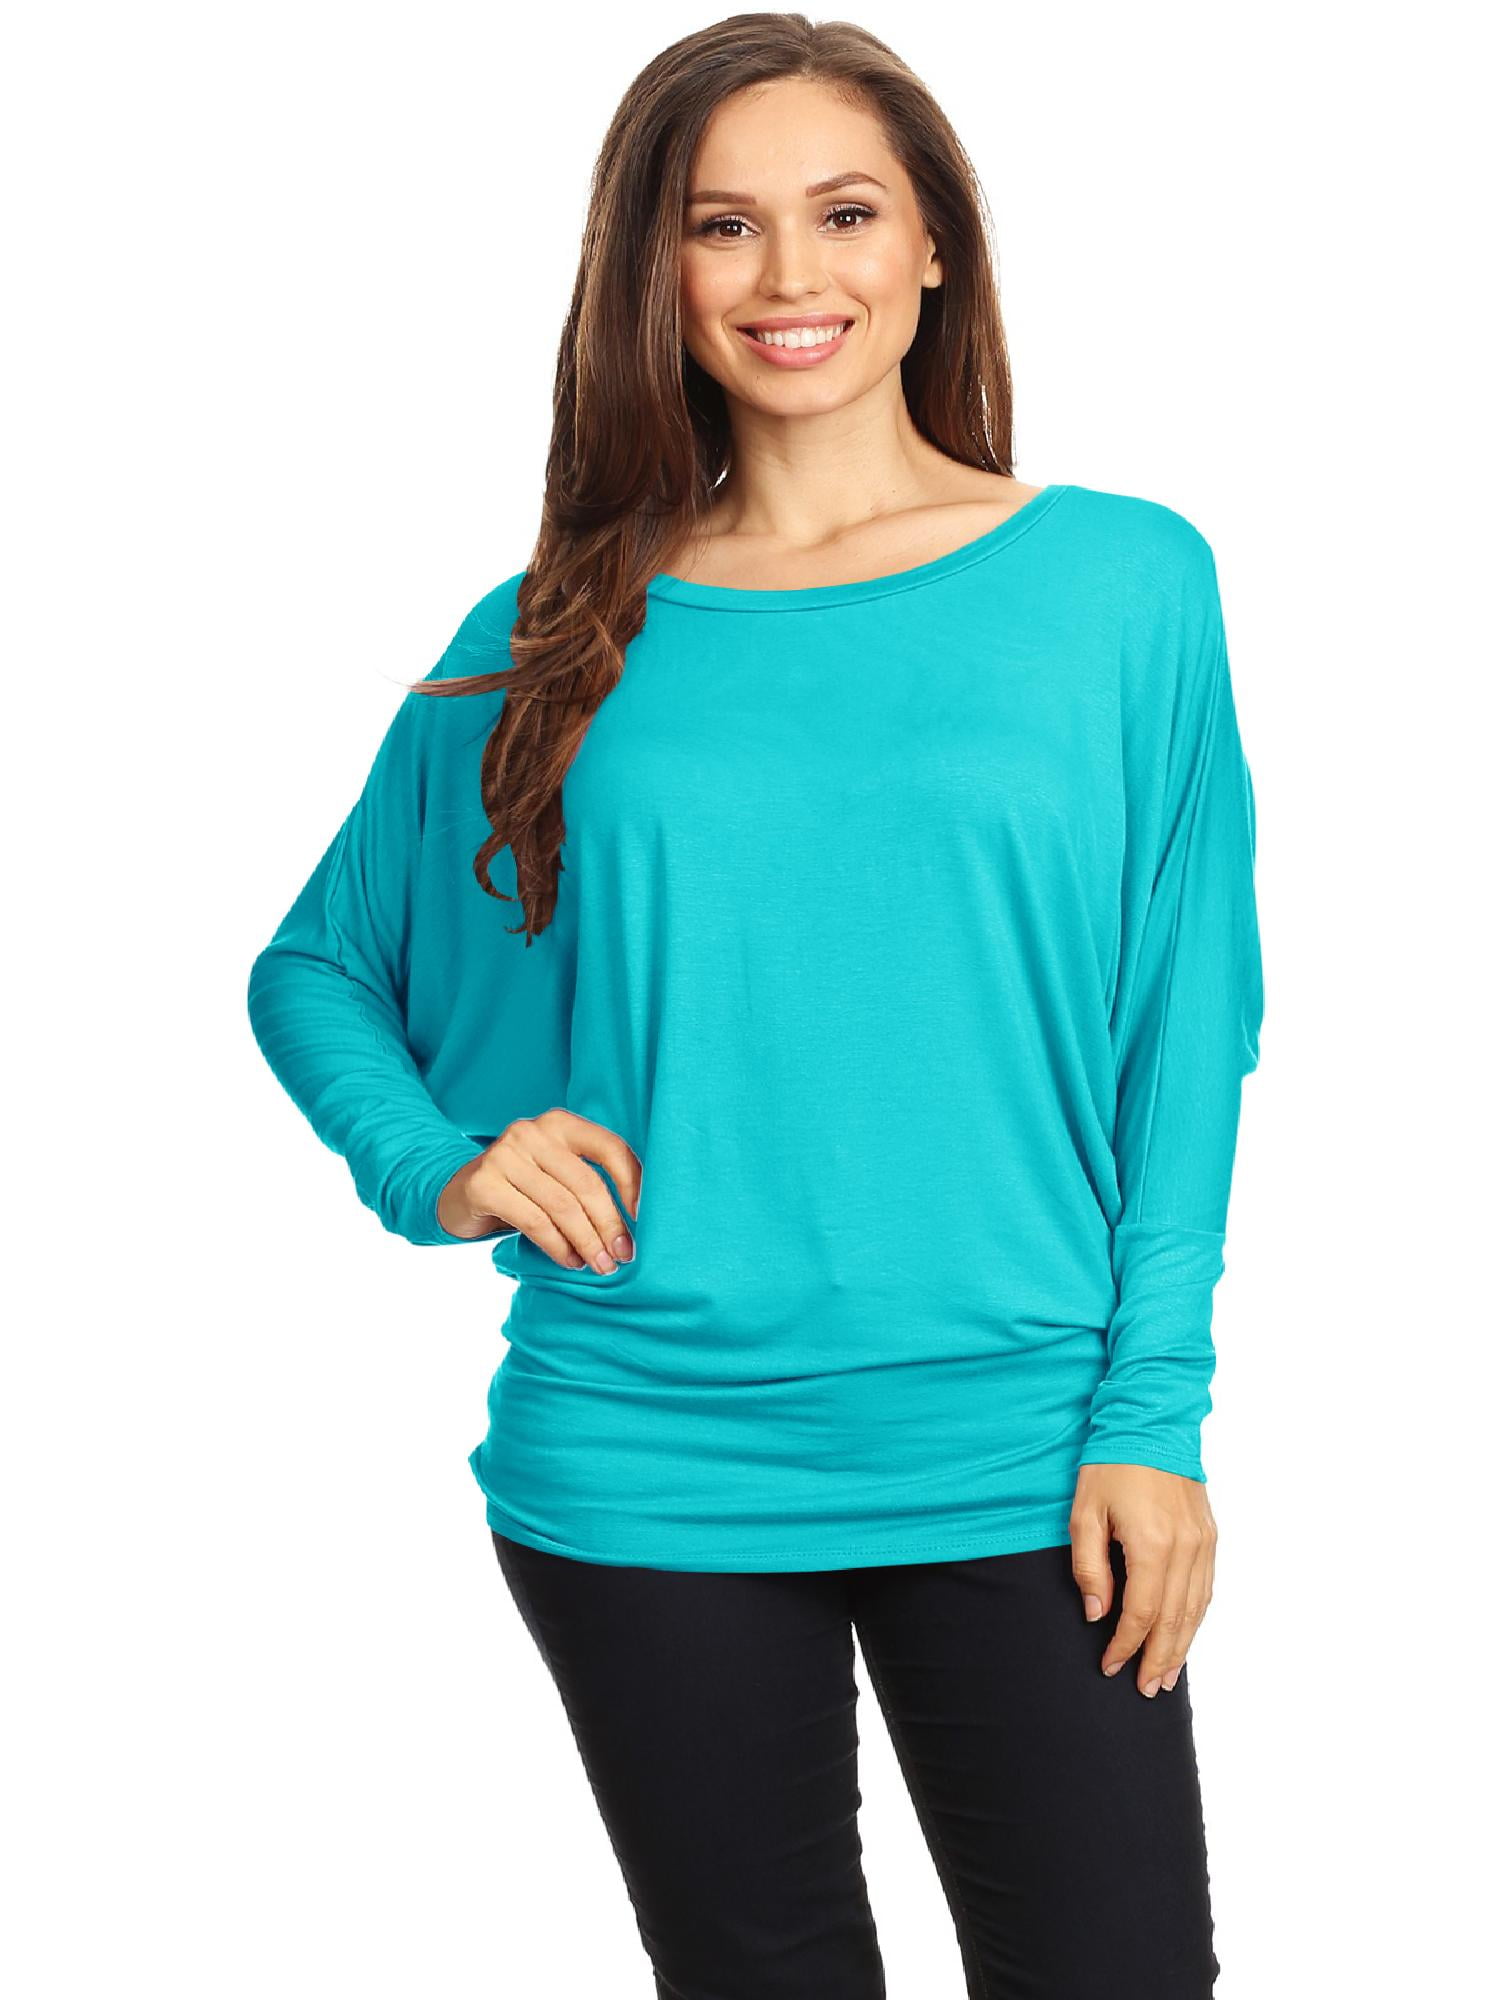 Moa Collection - Womens Boat Neck 3/4 Dolman Sleeve Basic Top Regular ...